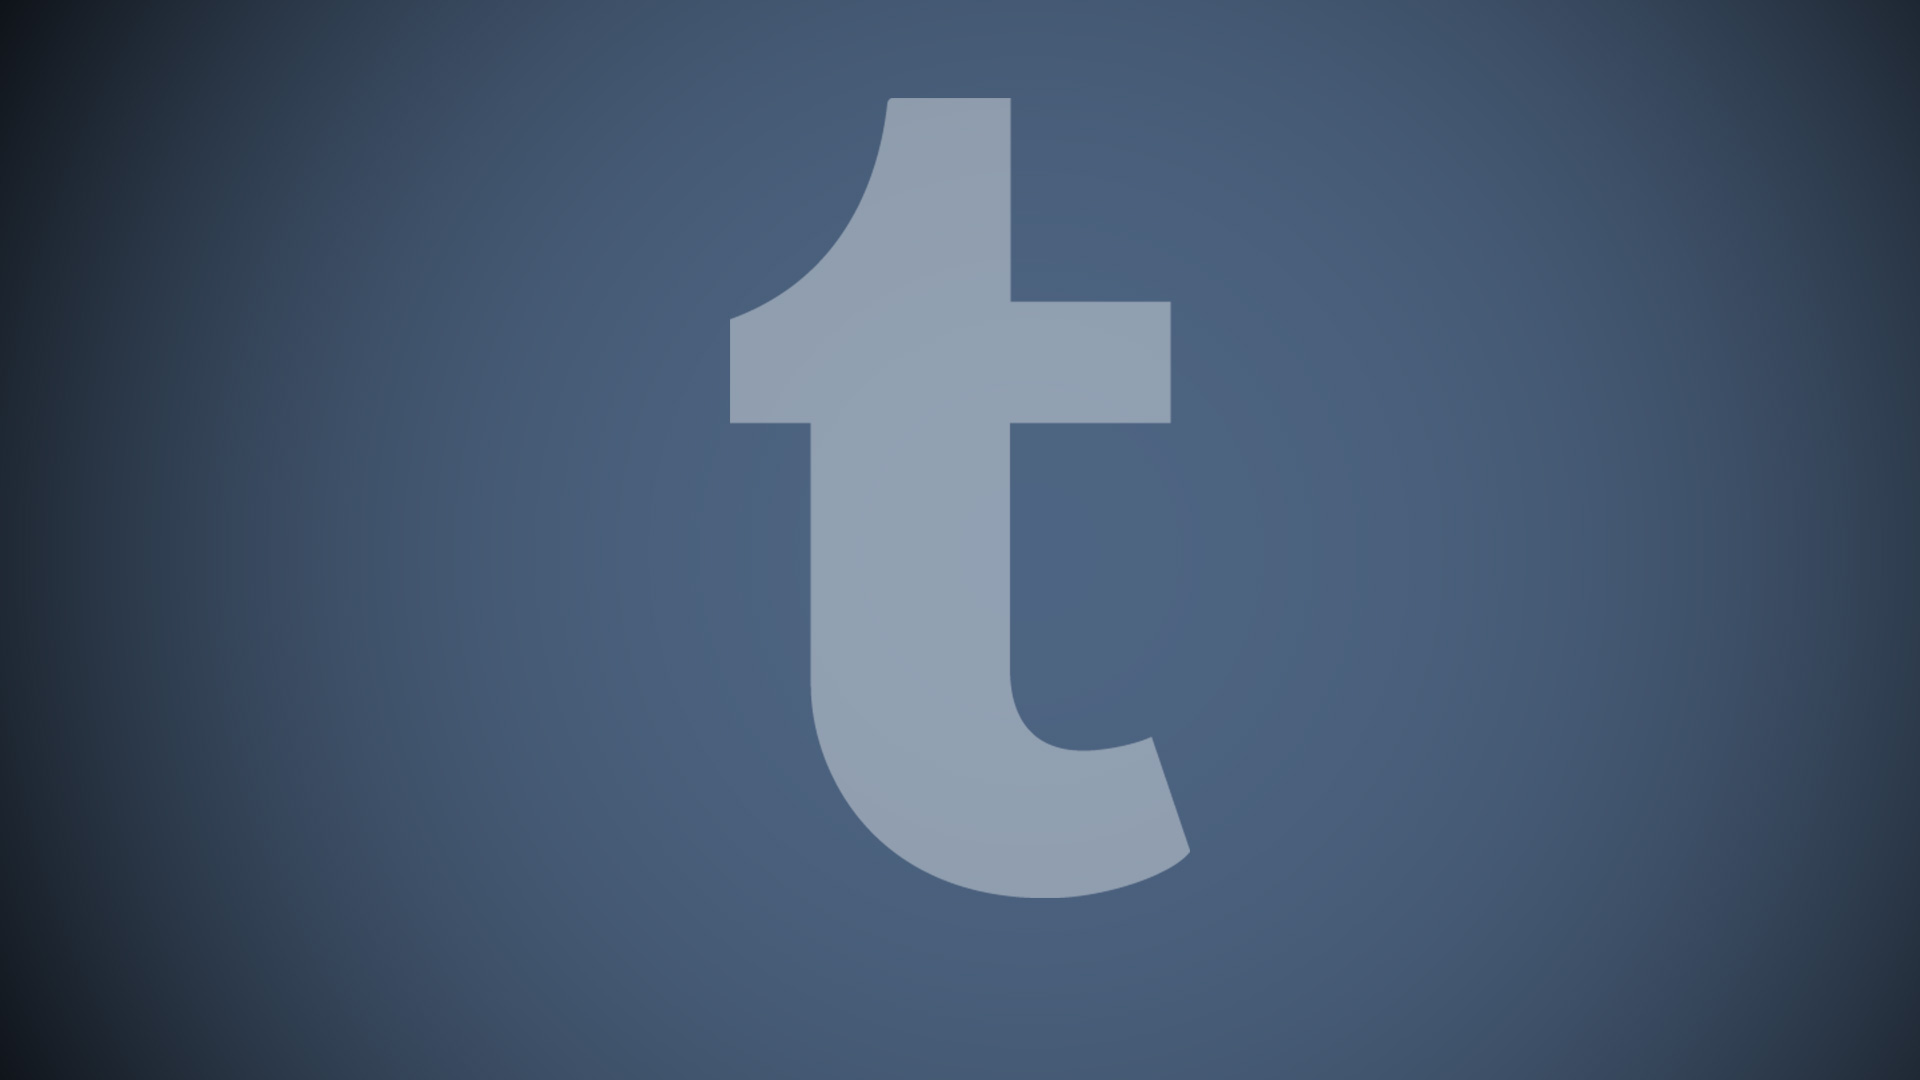 Tumblr is releasing ads across blogs & giving users a cut